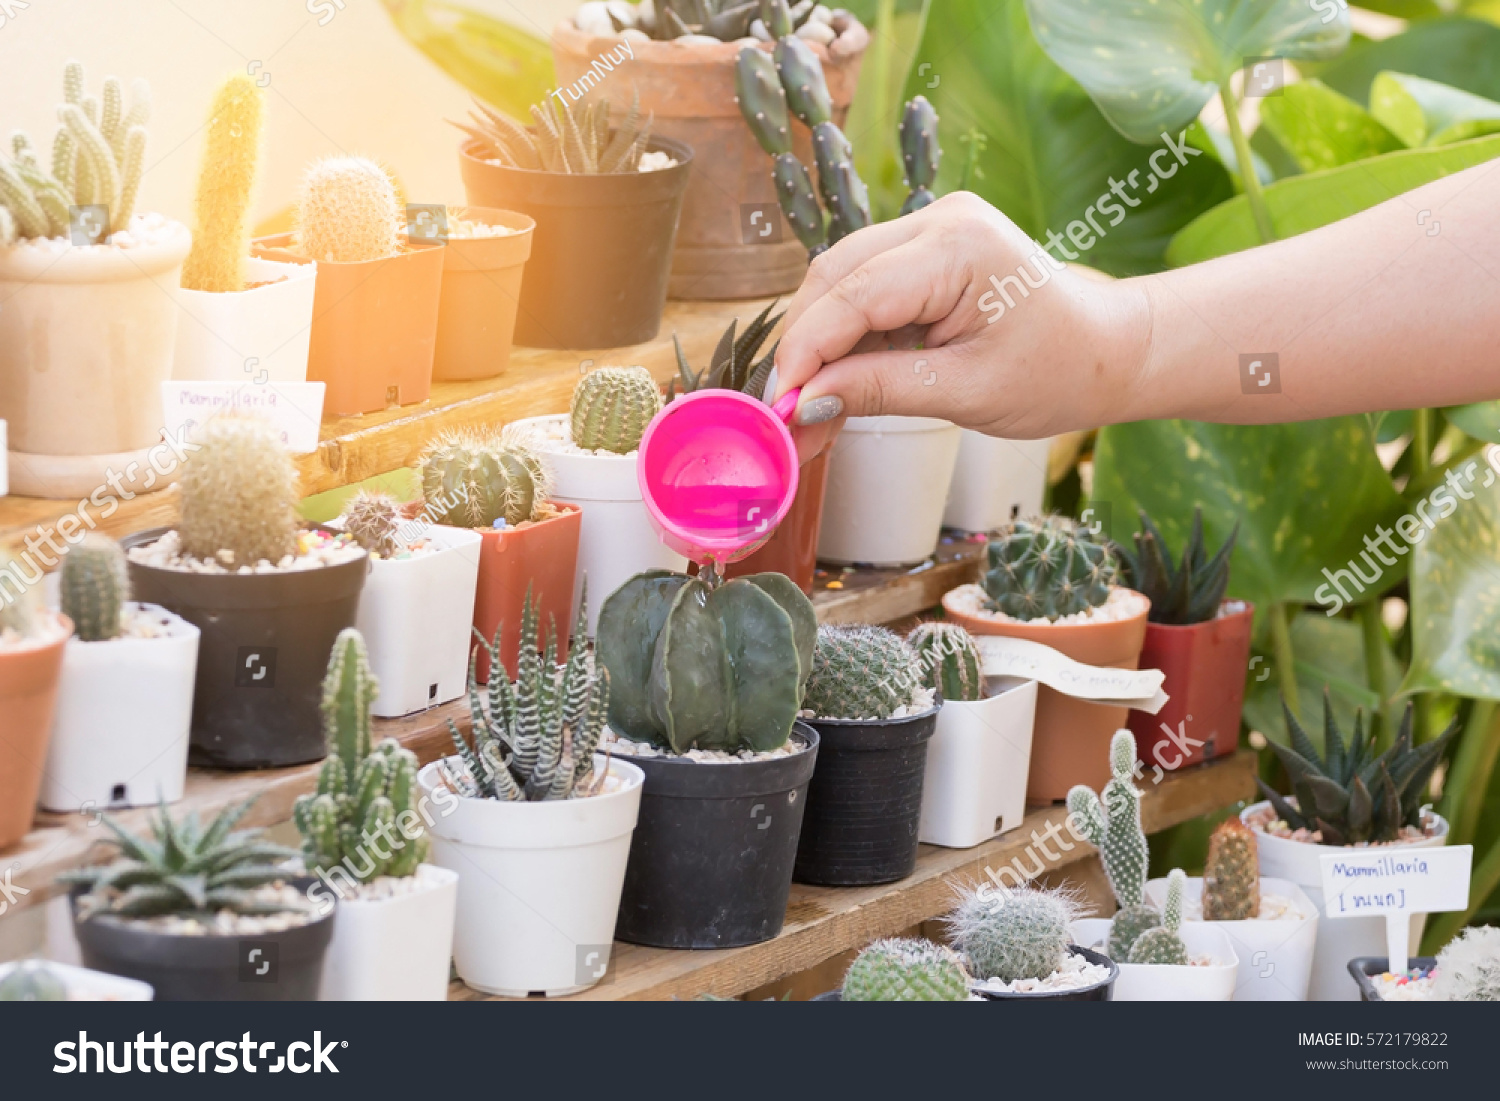 woman watering a plant with watering plastic cup, pours on cactus #572179822